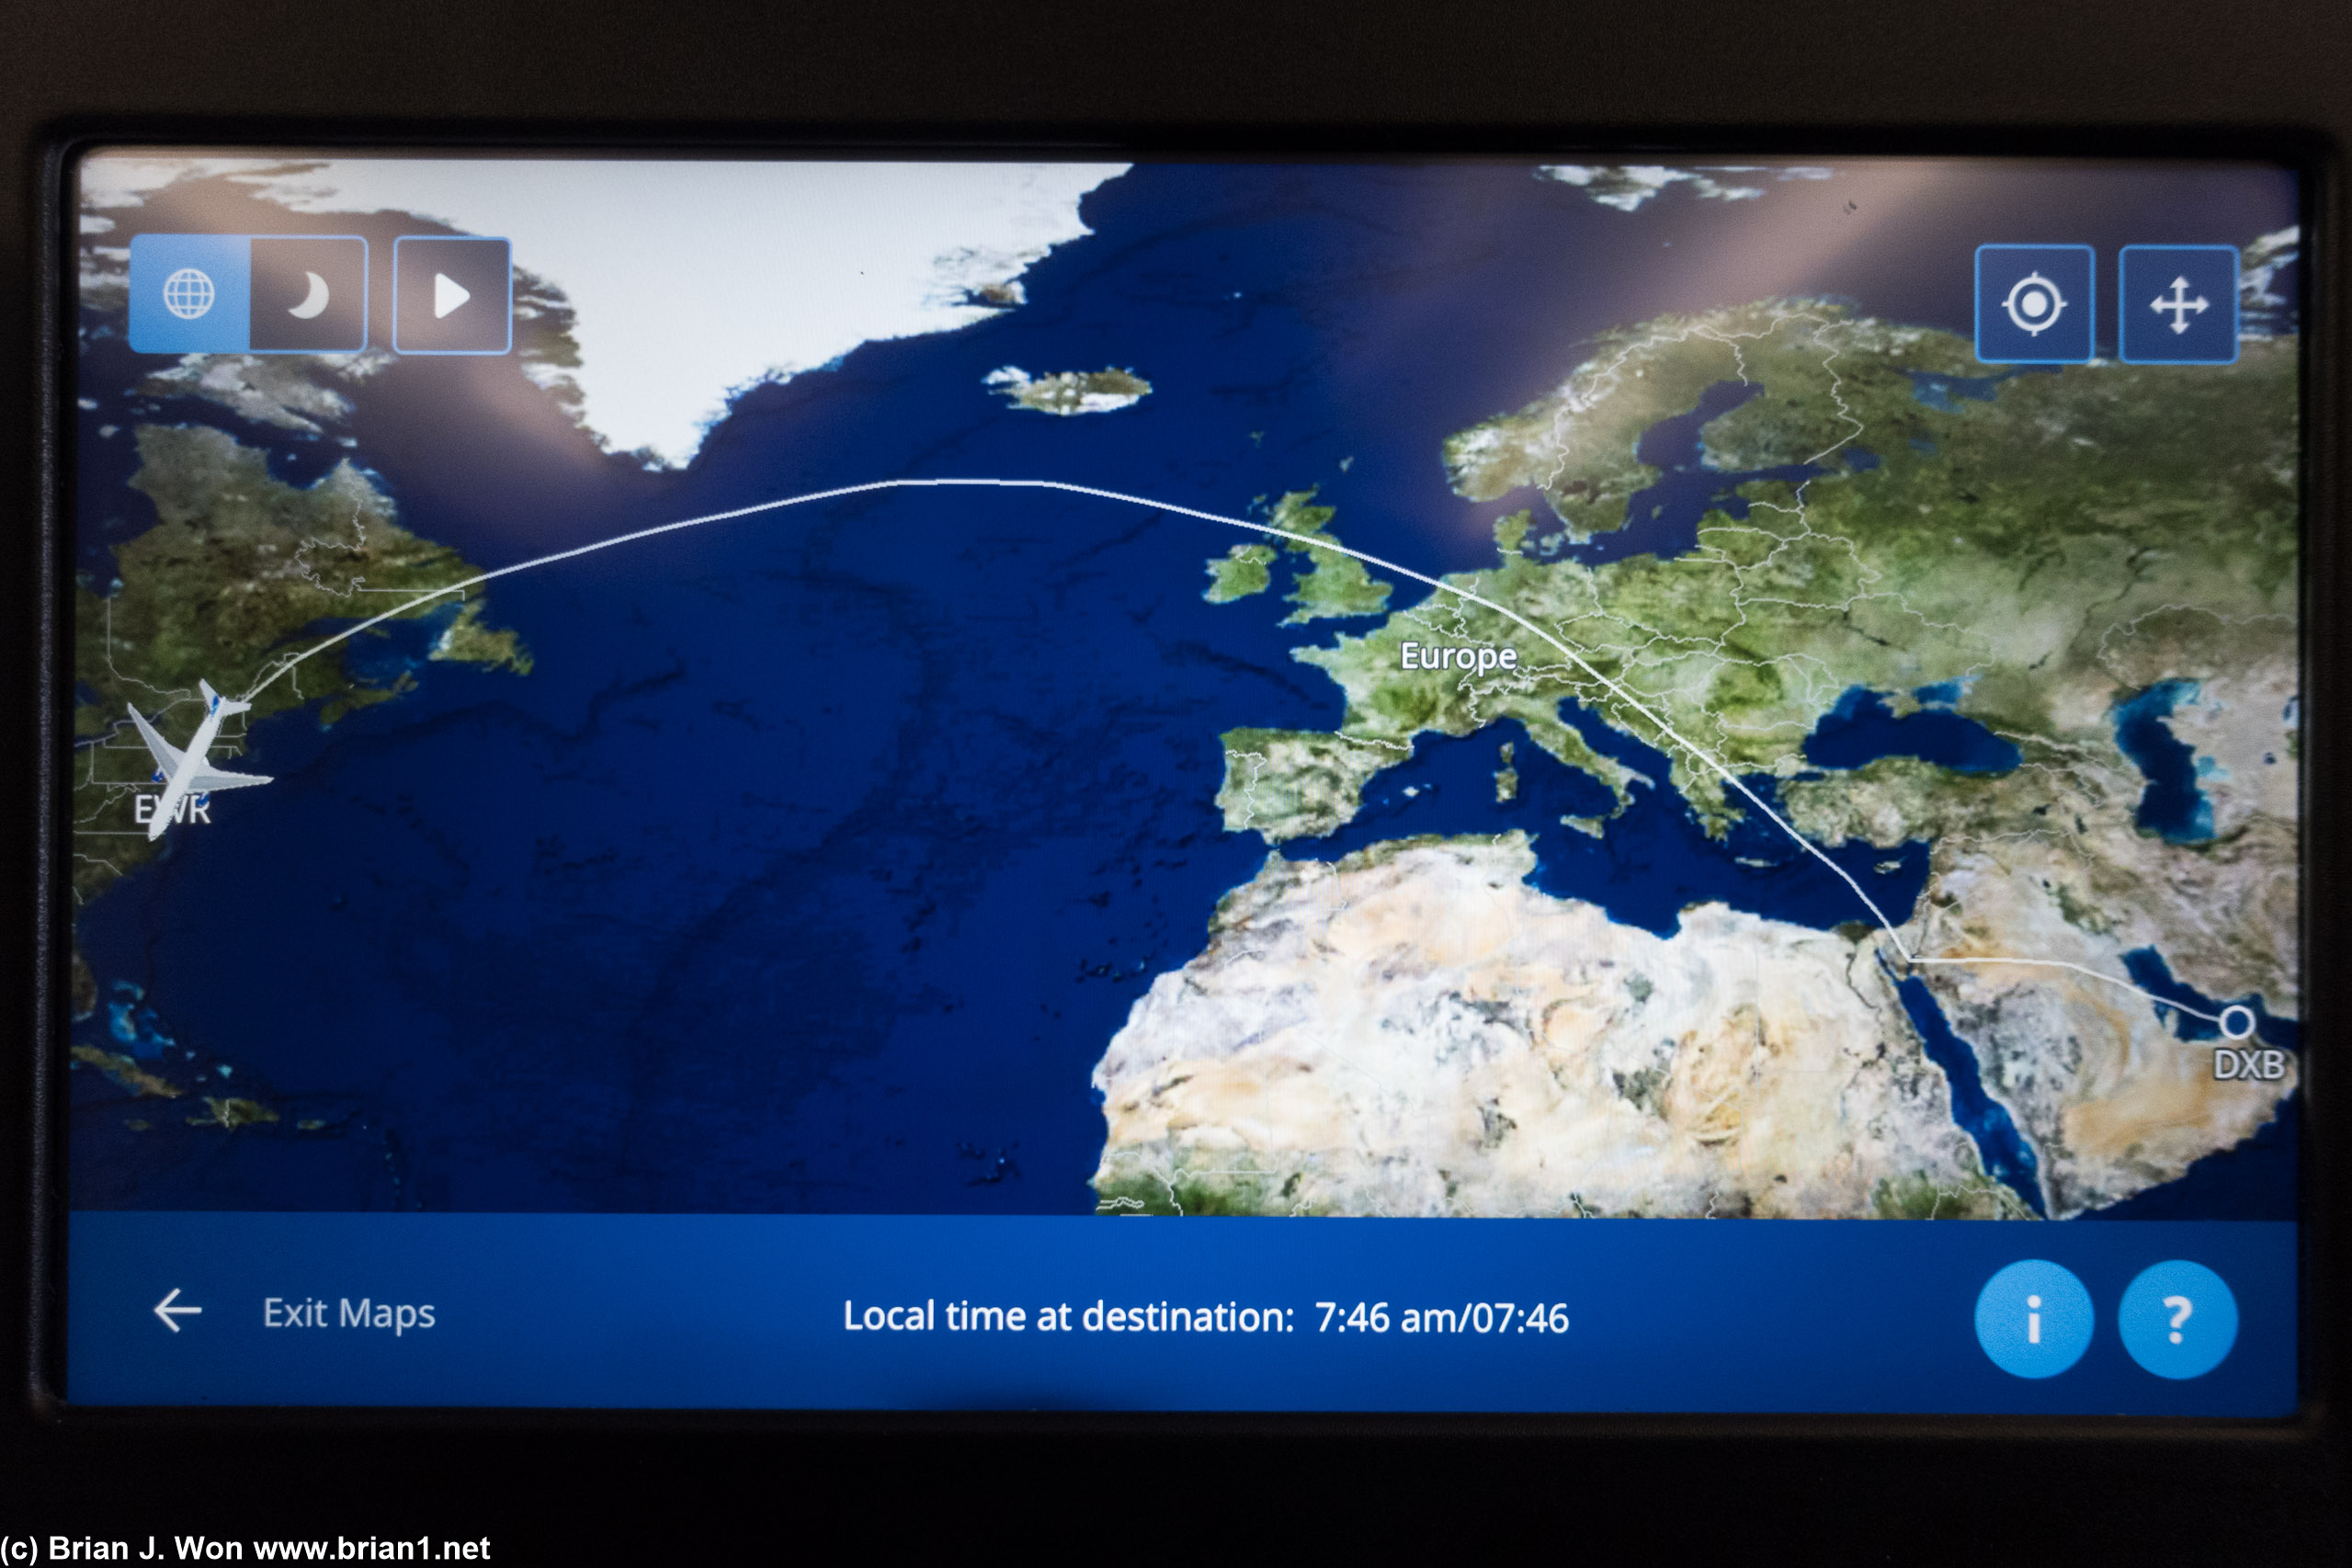 6,854 miles in the air per the map, 7,245 miles per Flightaware, 6,861 miles great circle, 13hr 40min in the air..